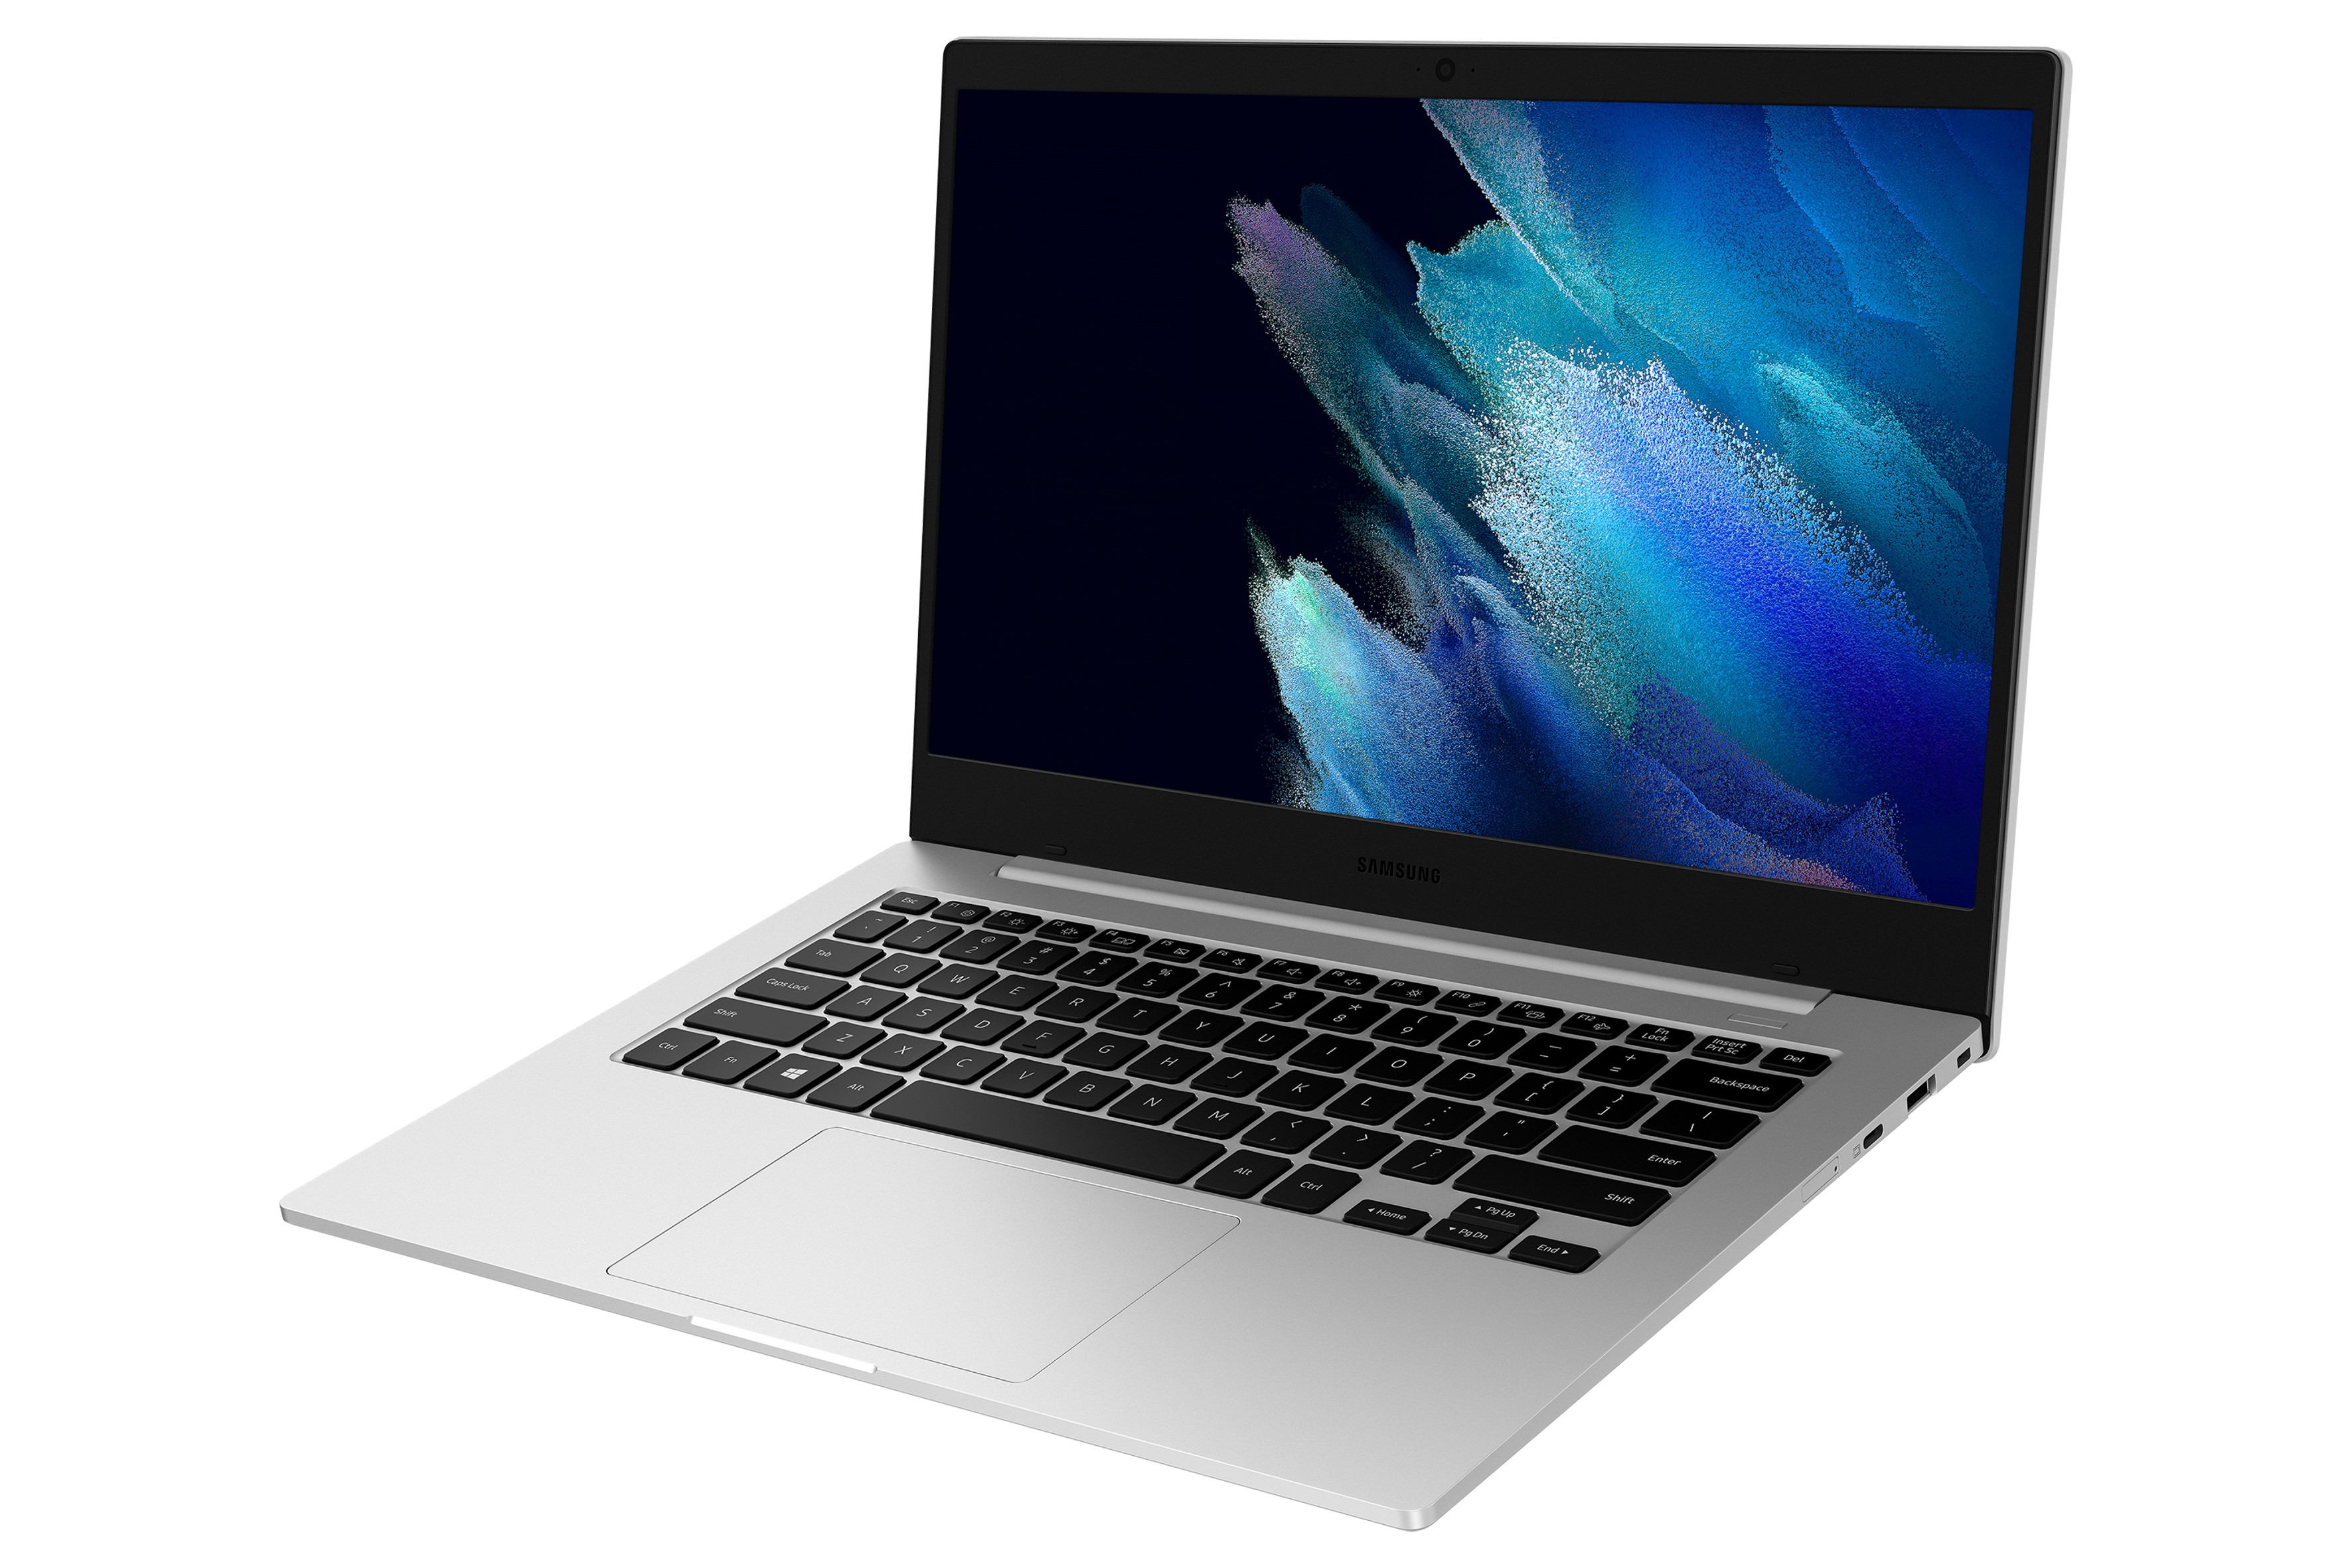 Samsung expands PC line up; unveils Galaxy Book Go series